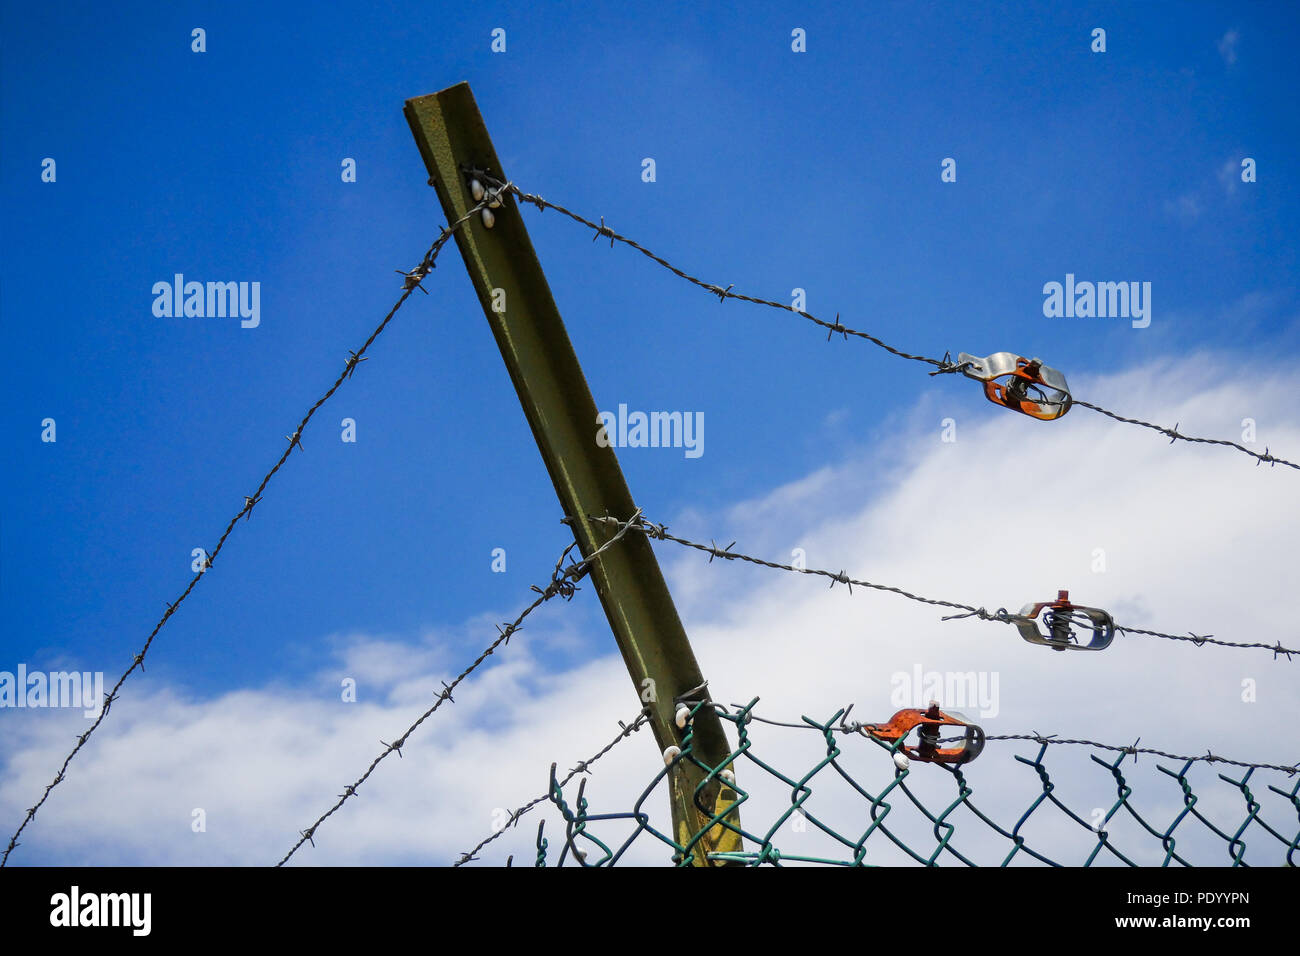 Barbed wires and tensioners, Barjols, Var, France Stock Photo